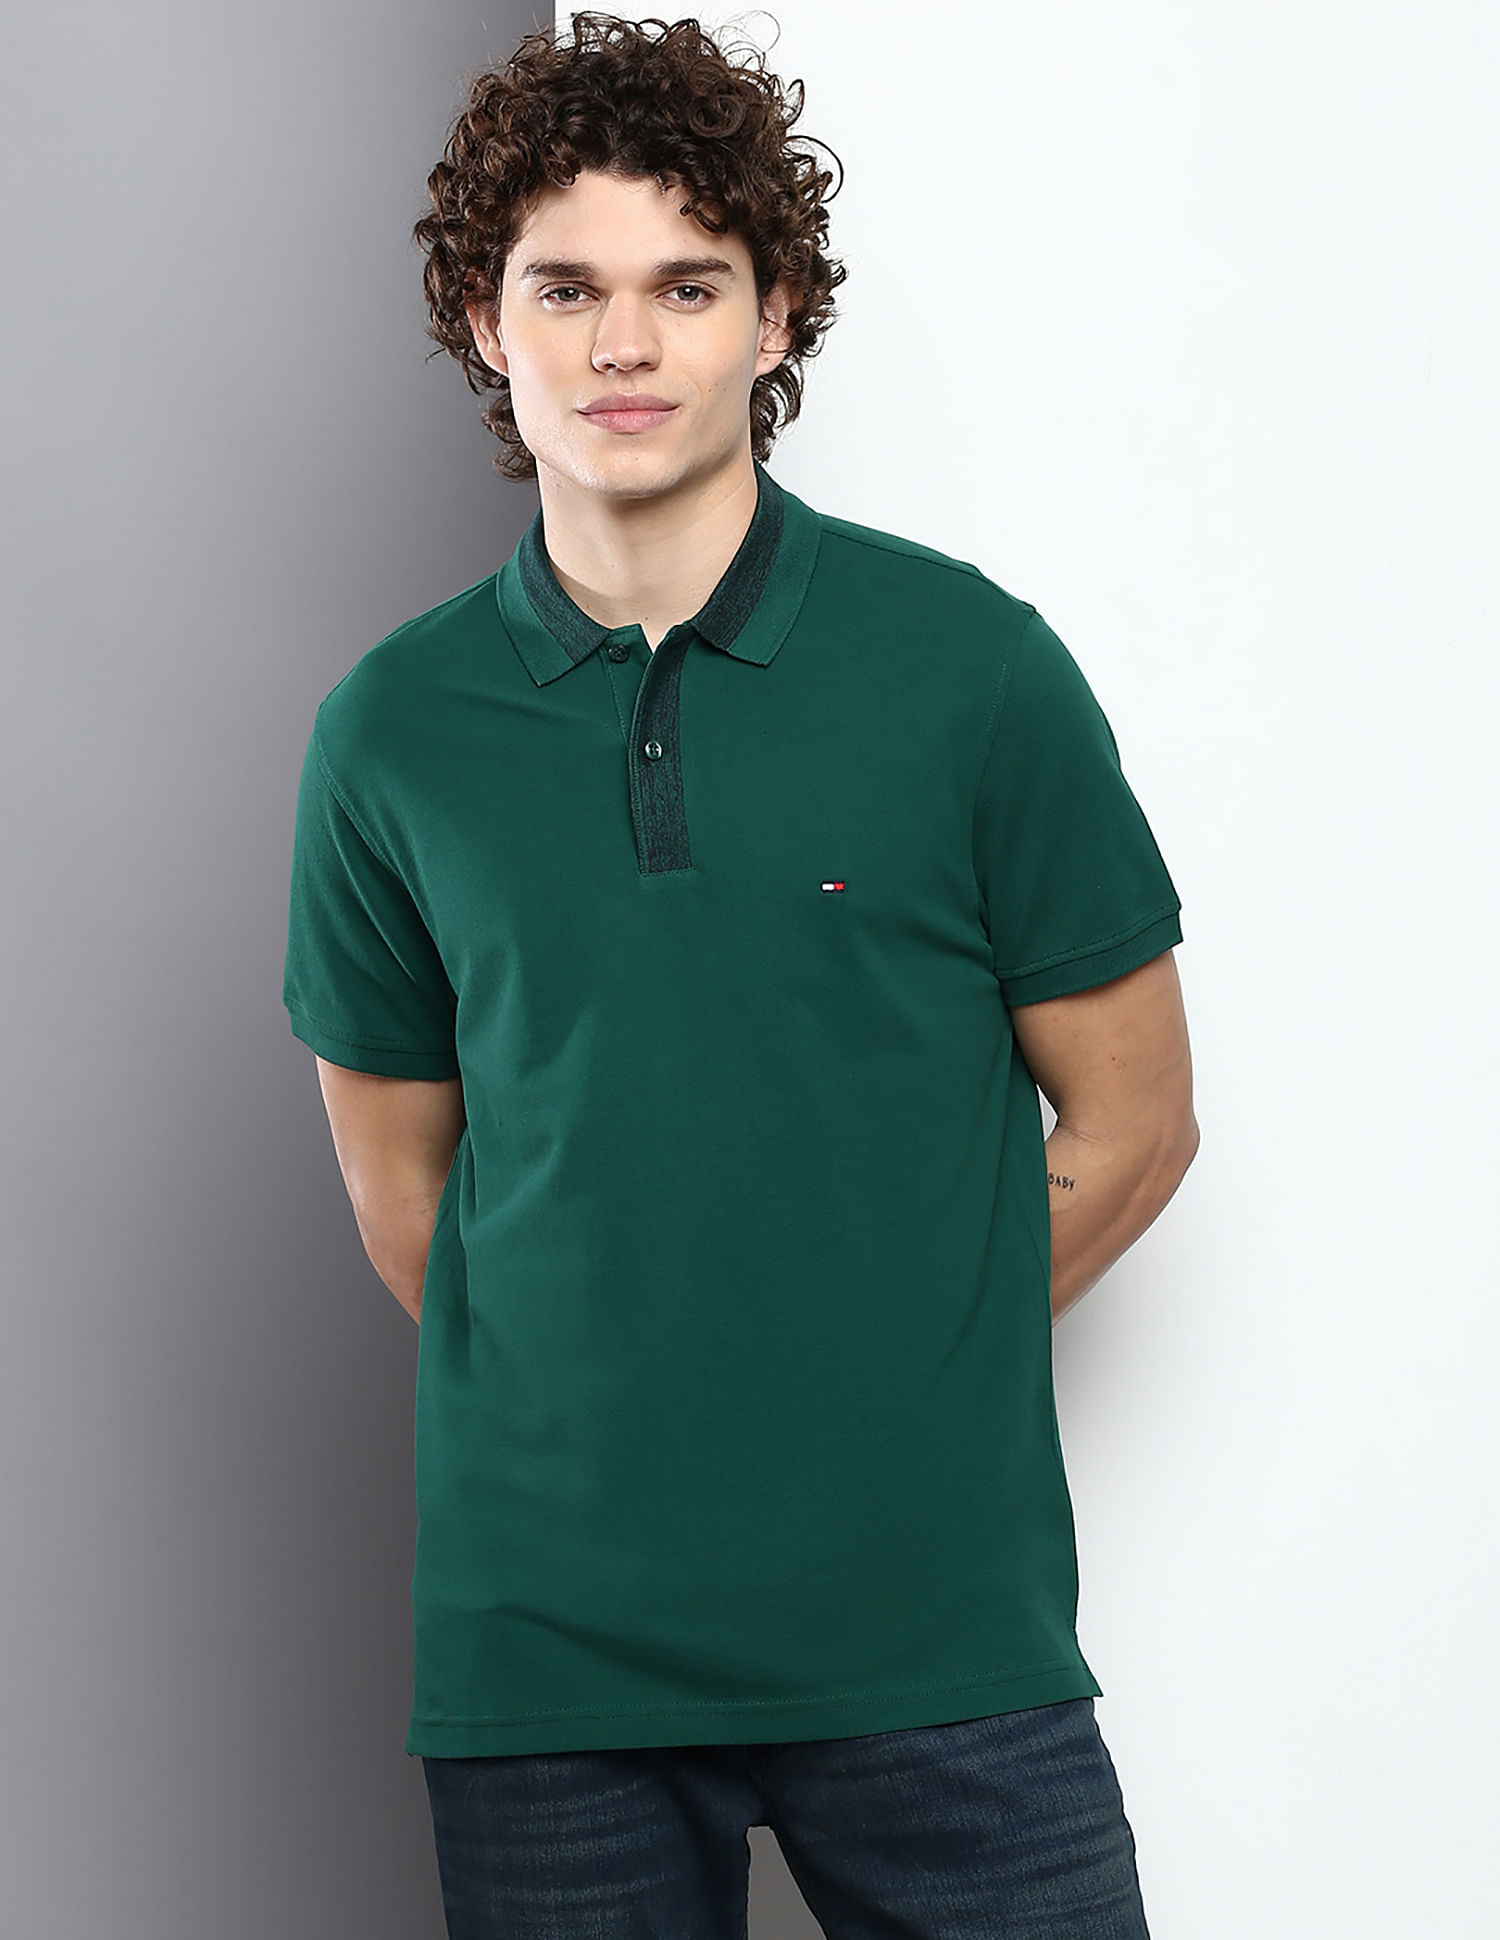 TOMMY HILFIGER Green Solid Polo Shirt Sz. Large Pique 100% Cotton